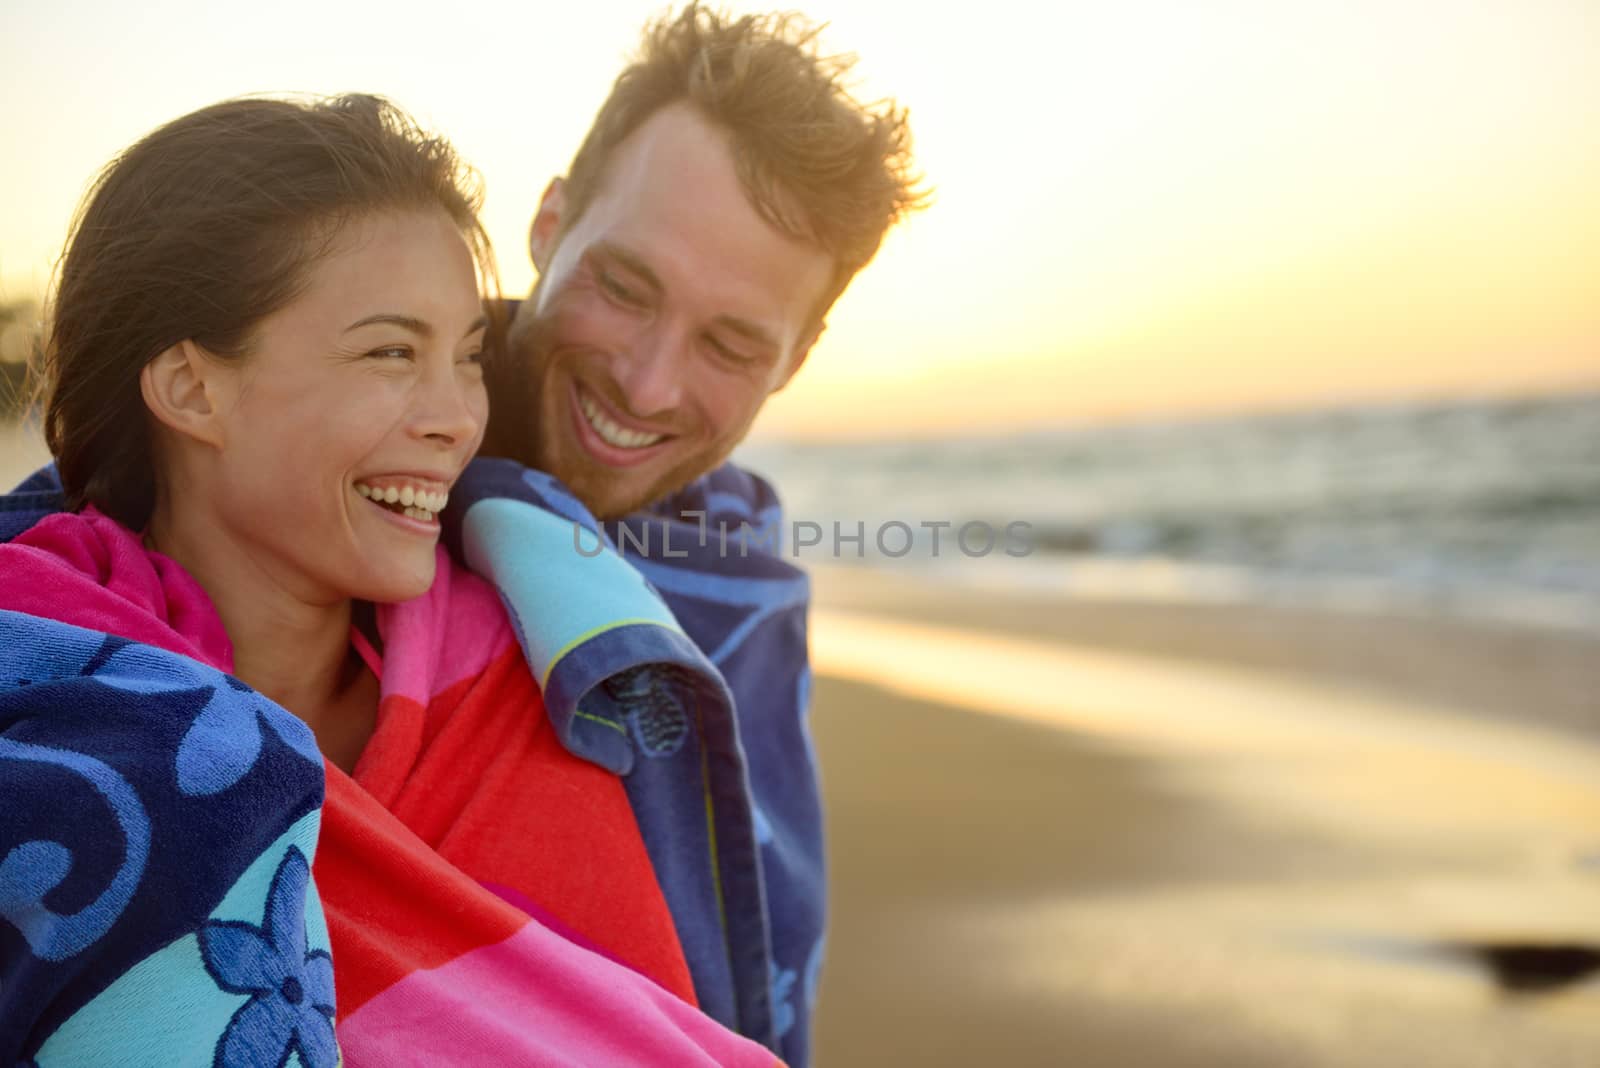 Portrait of happy romantic young interracial couple embracing each other at beach sunset having fun outdoors during holidays vacation travel. Beautiful Asian woman, handsome Caucasian man.